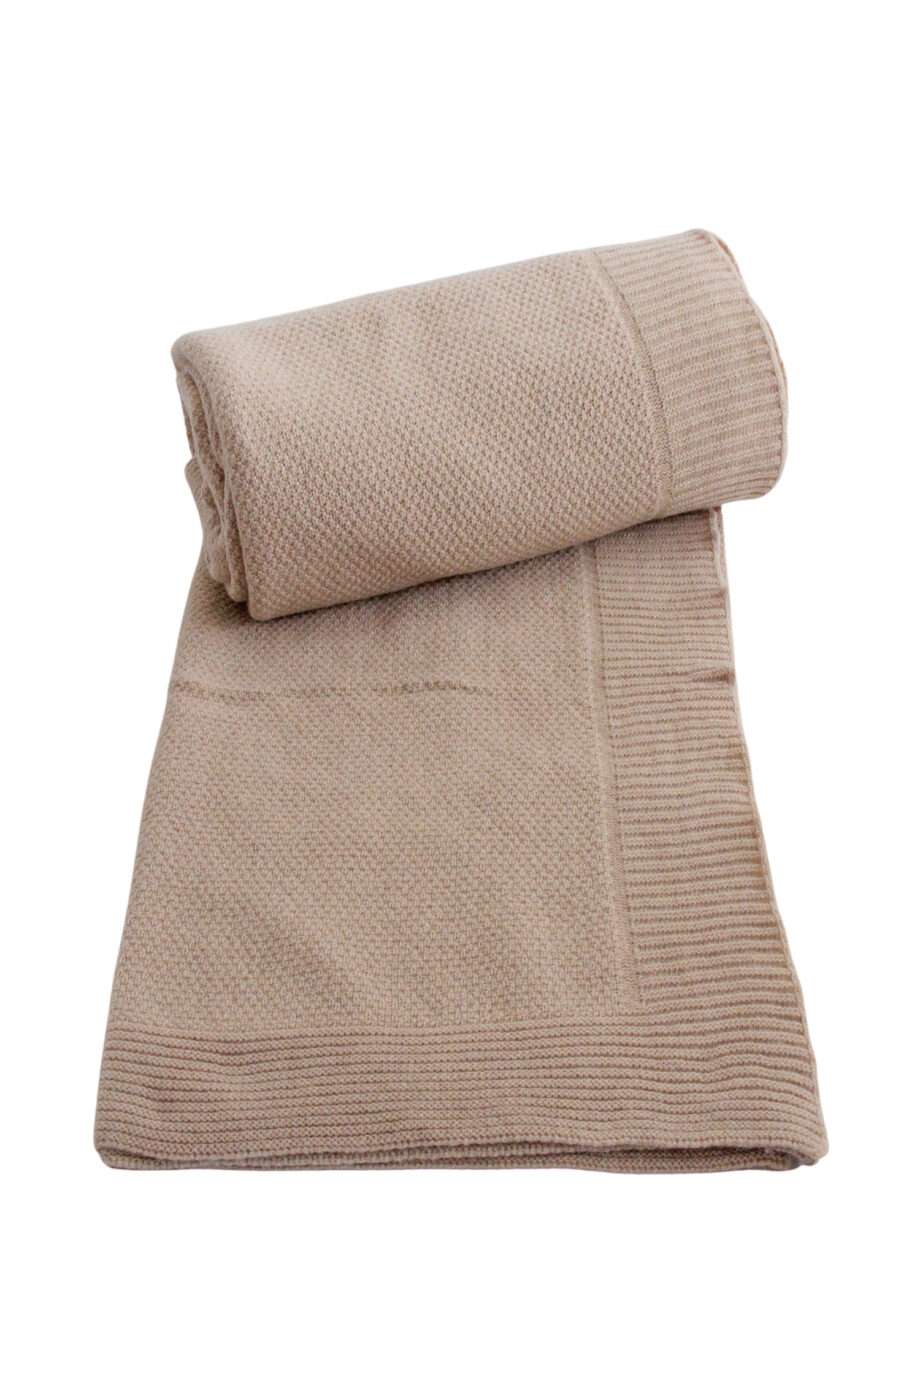 rice ochre knitted woolen throw large